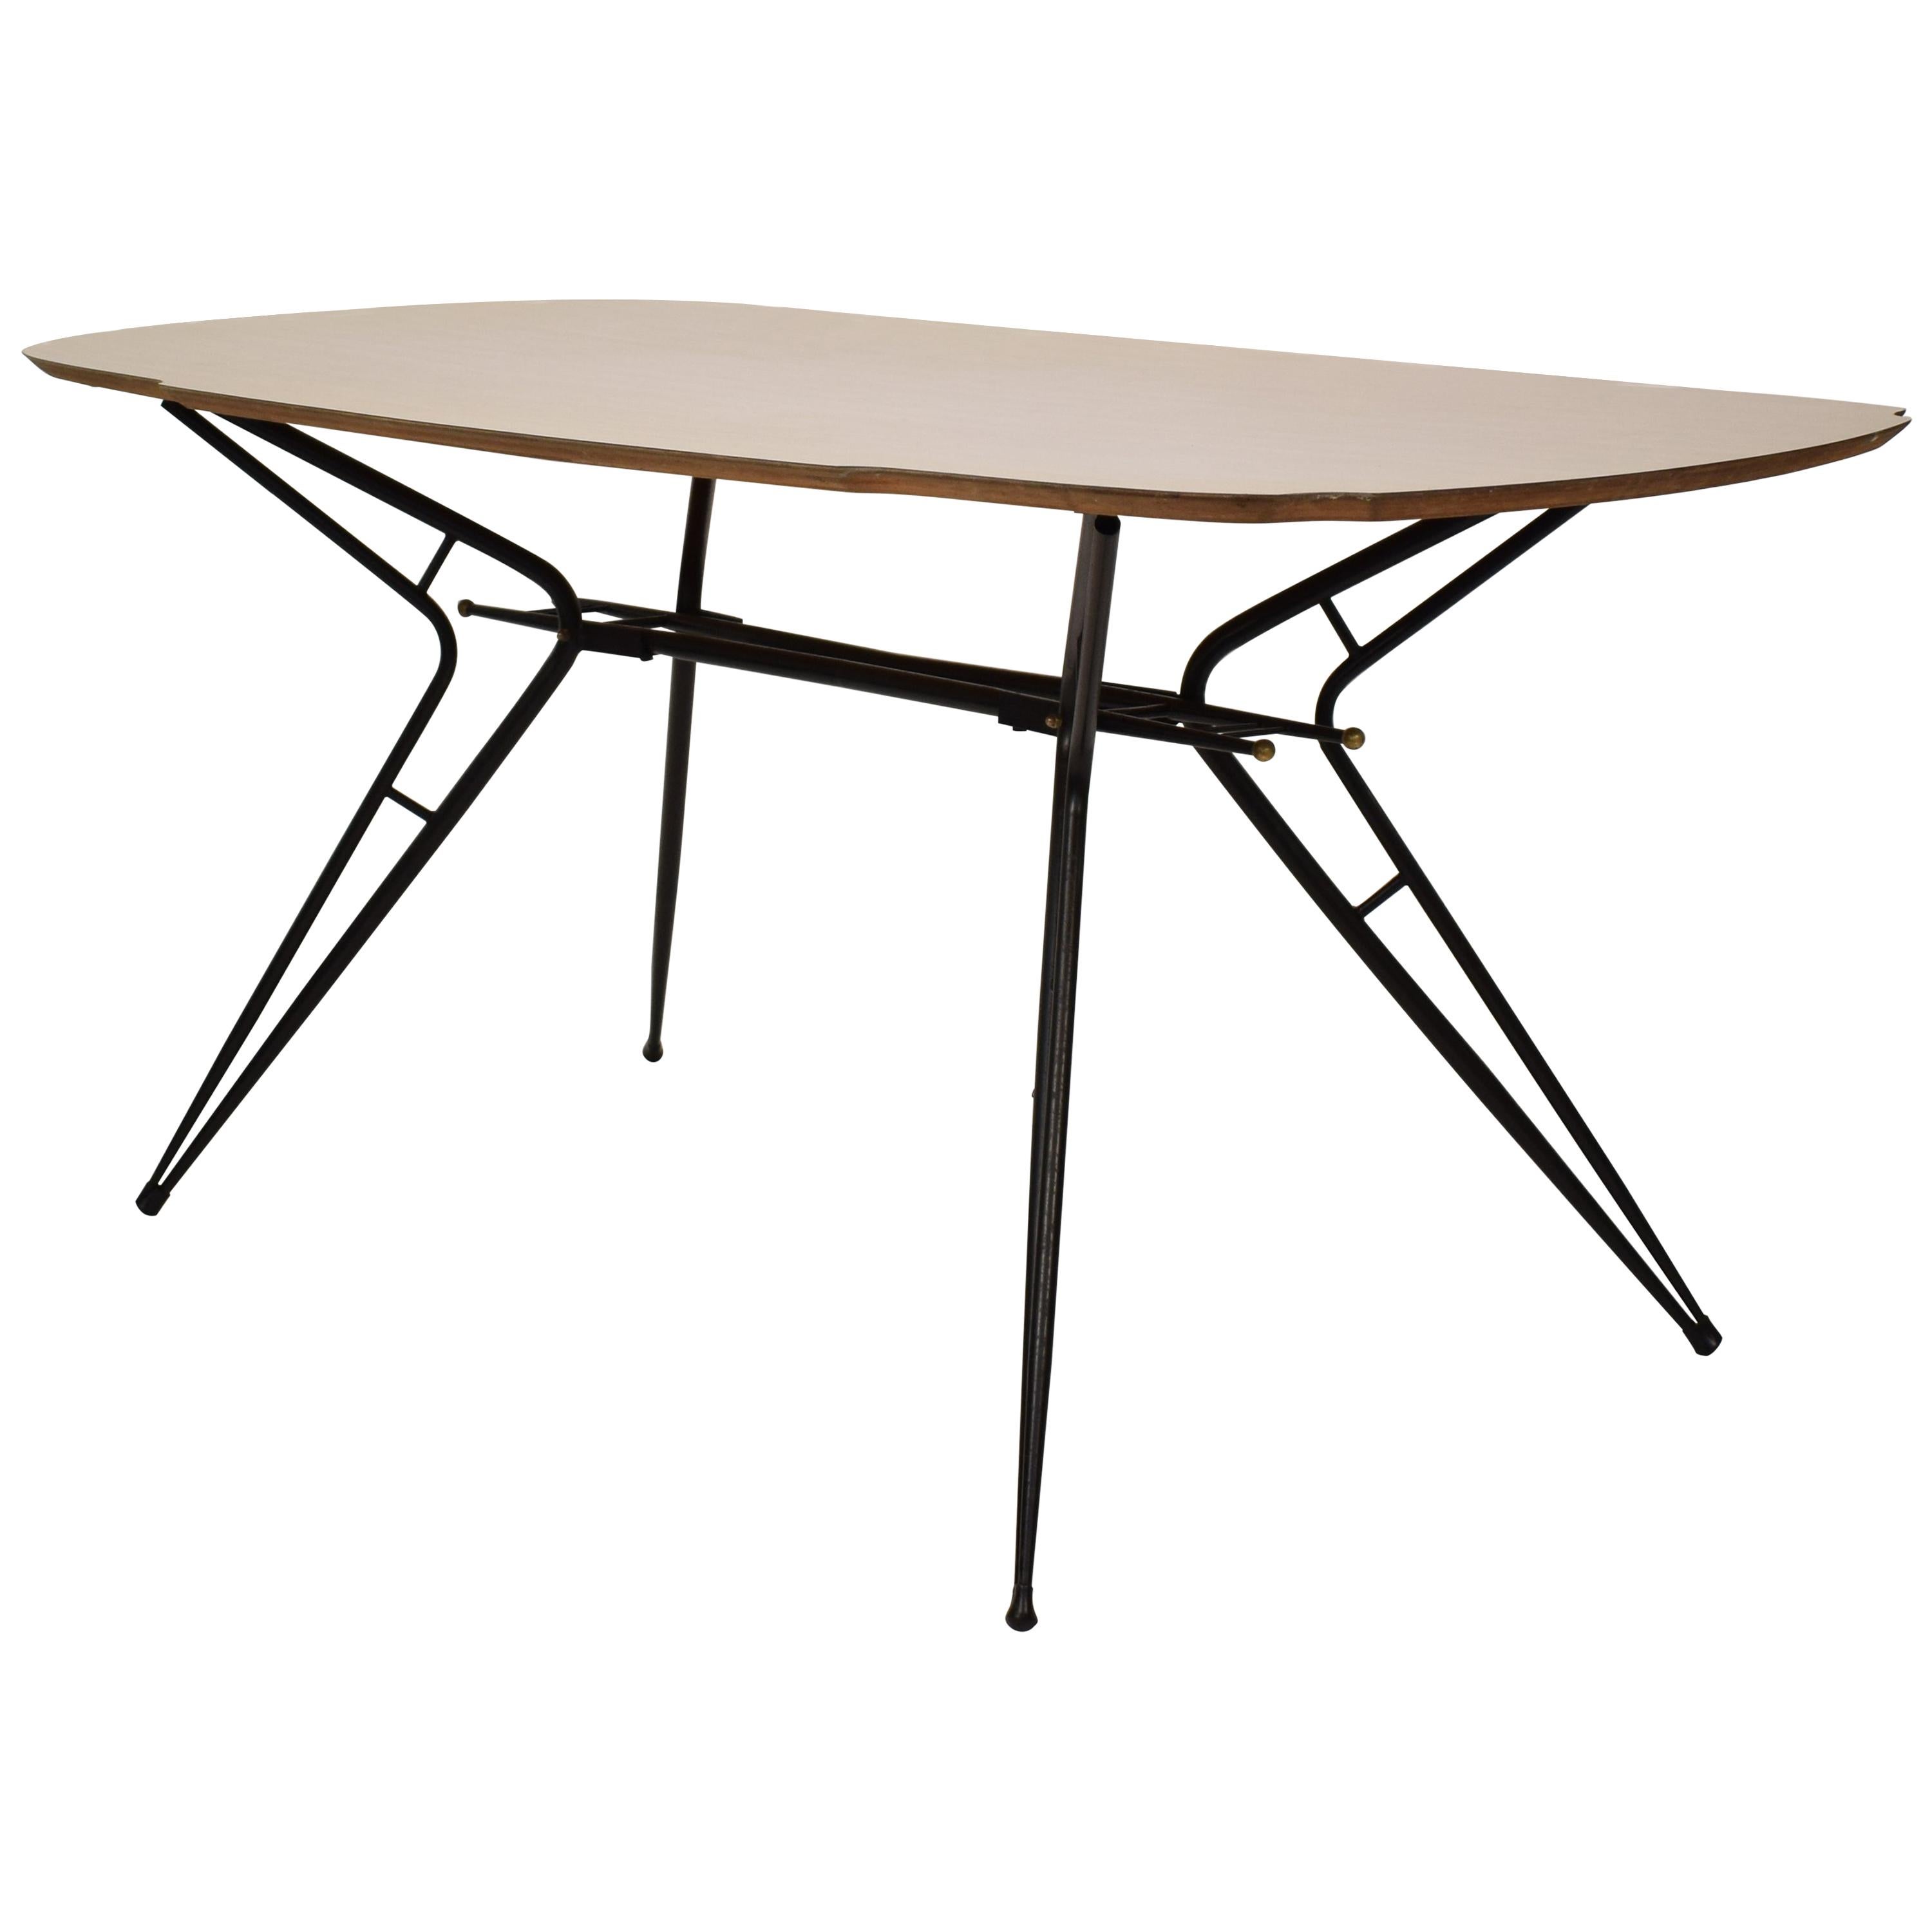 Midcentury Italian Black and White Dining Table Attributed to Ico Parisi, 1958